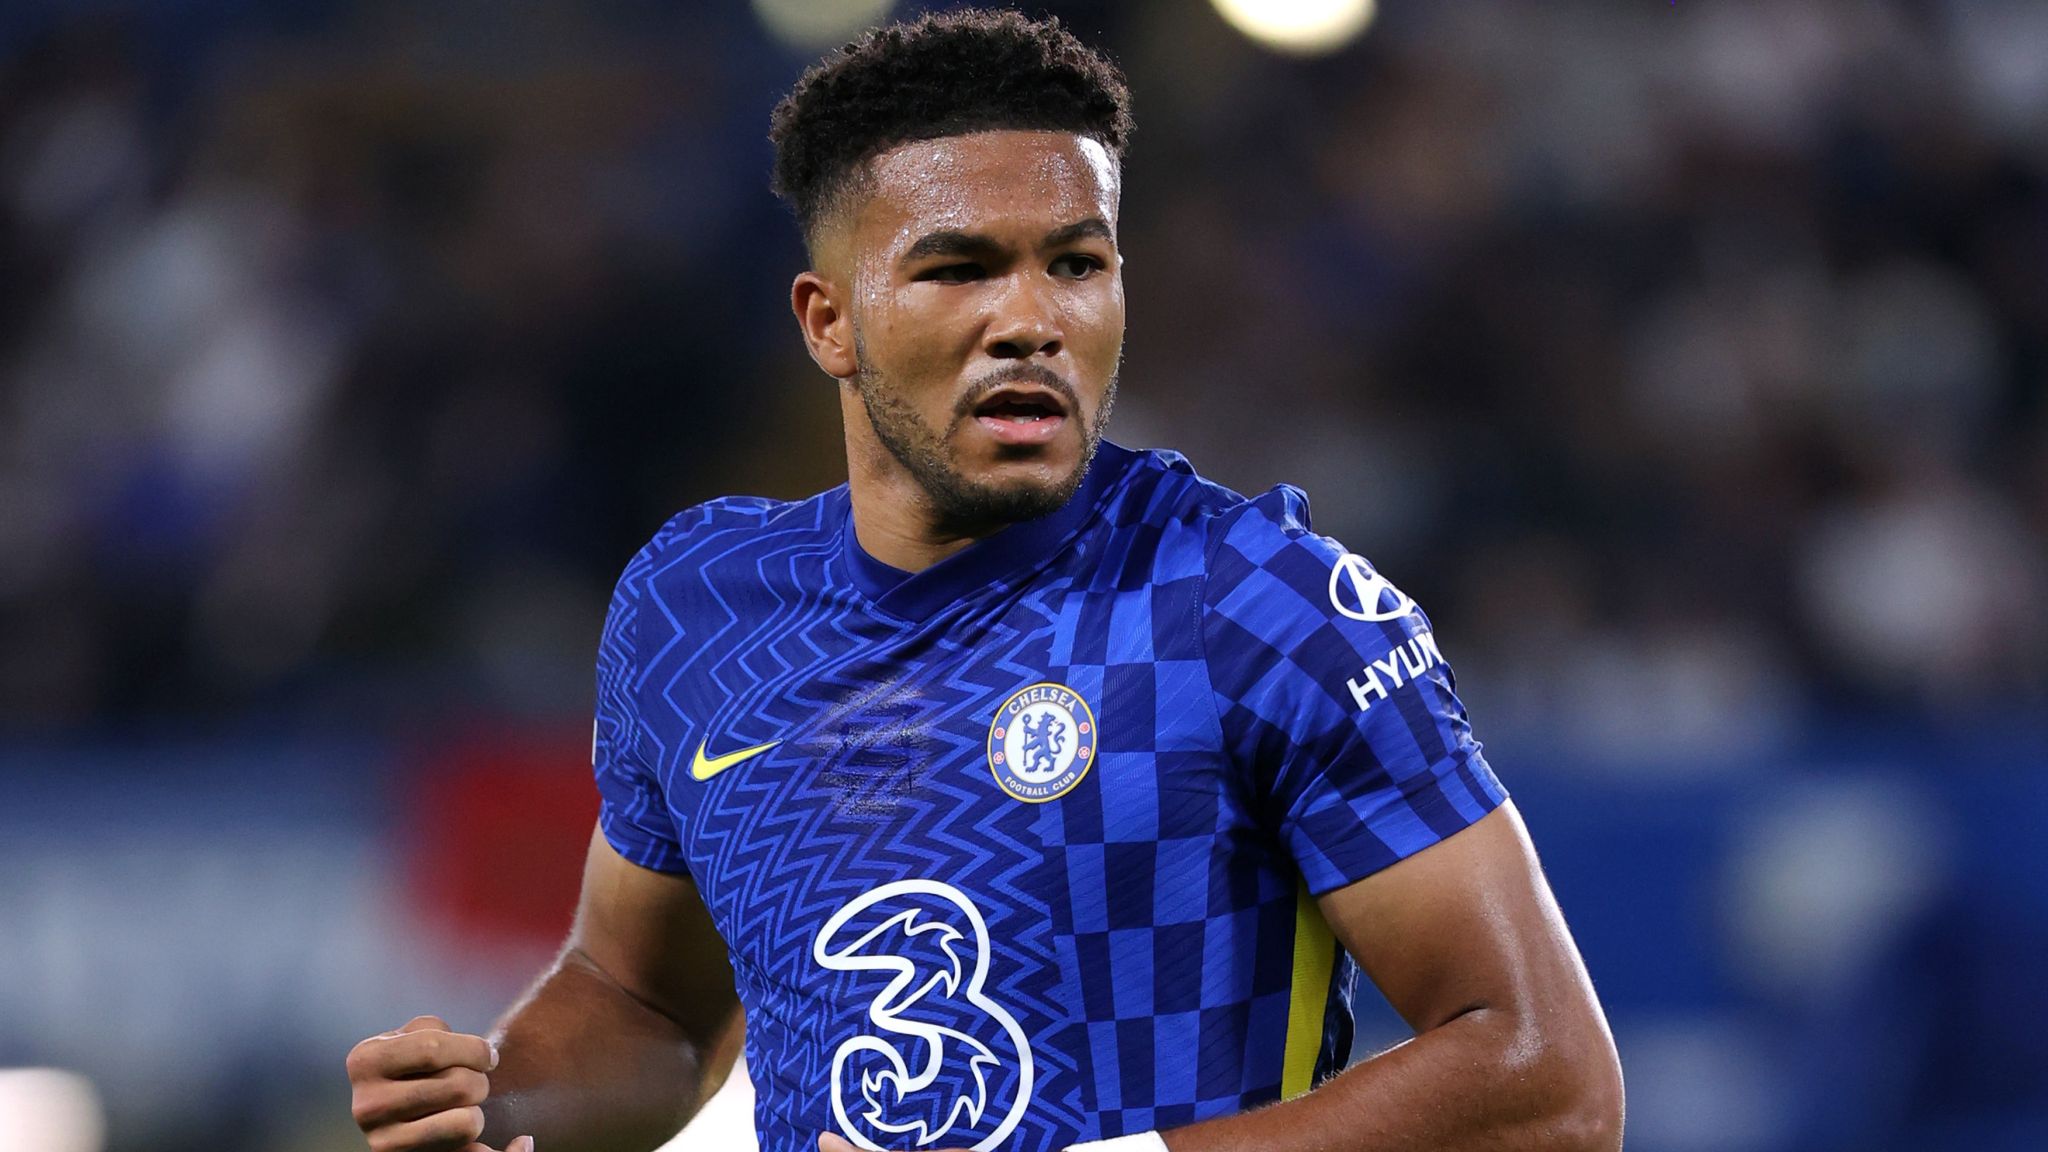 Reece James has Champions League and Euro 2020 medals stolen in burglary while playing for Chelsea vs Zenit | Football News | Sky Sports